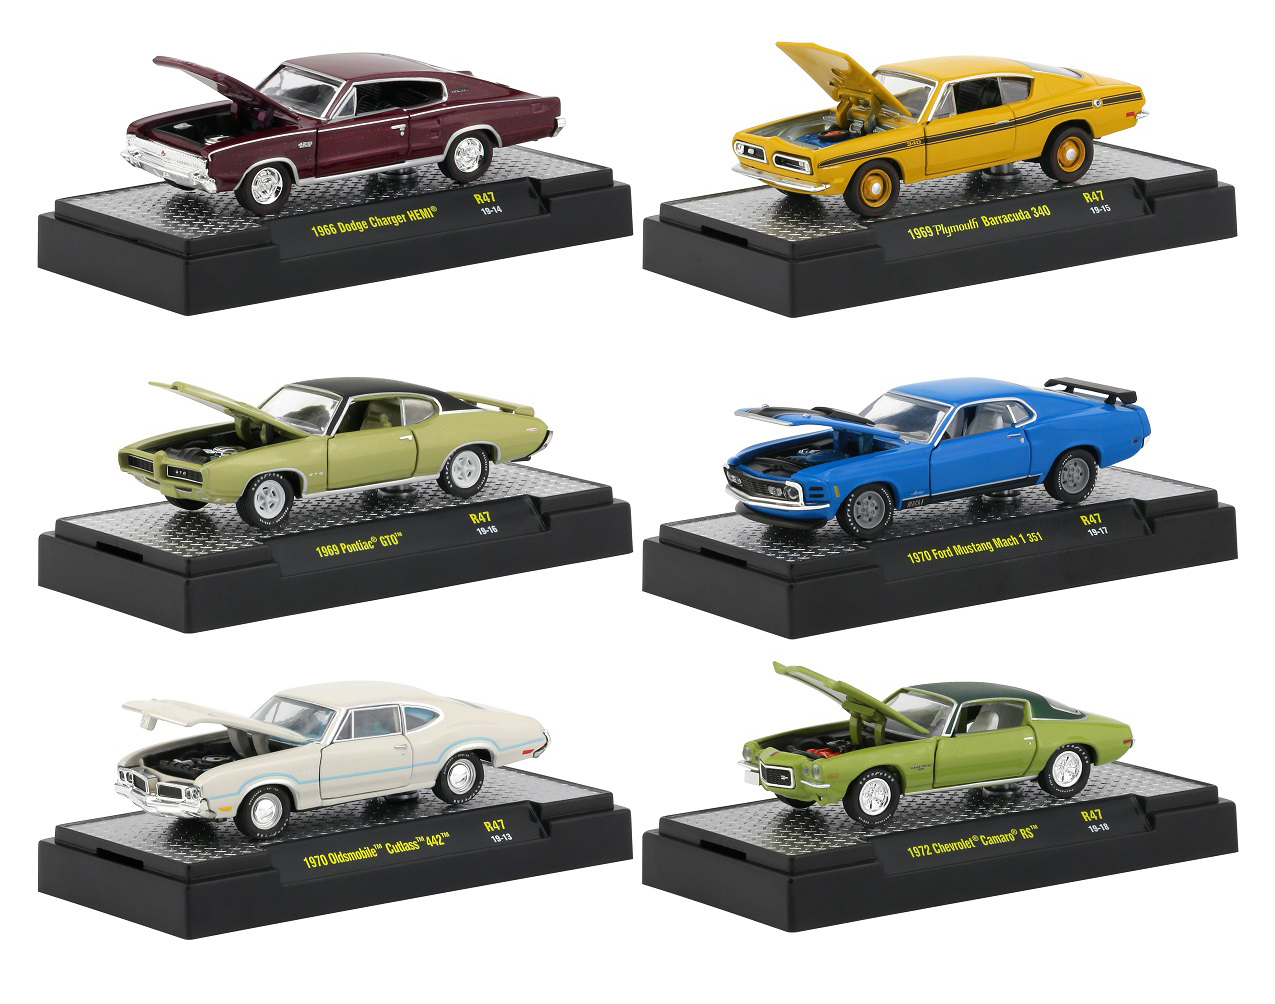 Detroit Muscle Release 47 Set Of 6 Cars In Display Cases 1/64 Diecast Model Cars By M2 Machines